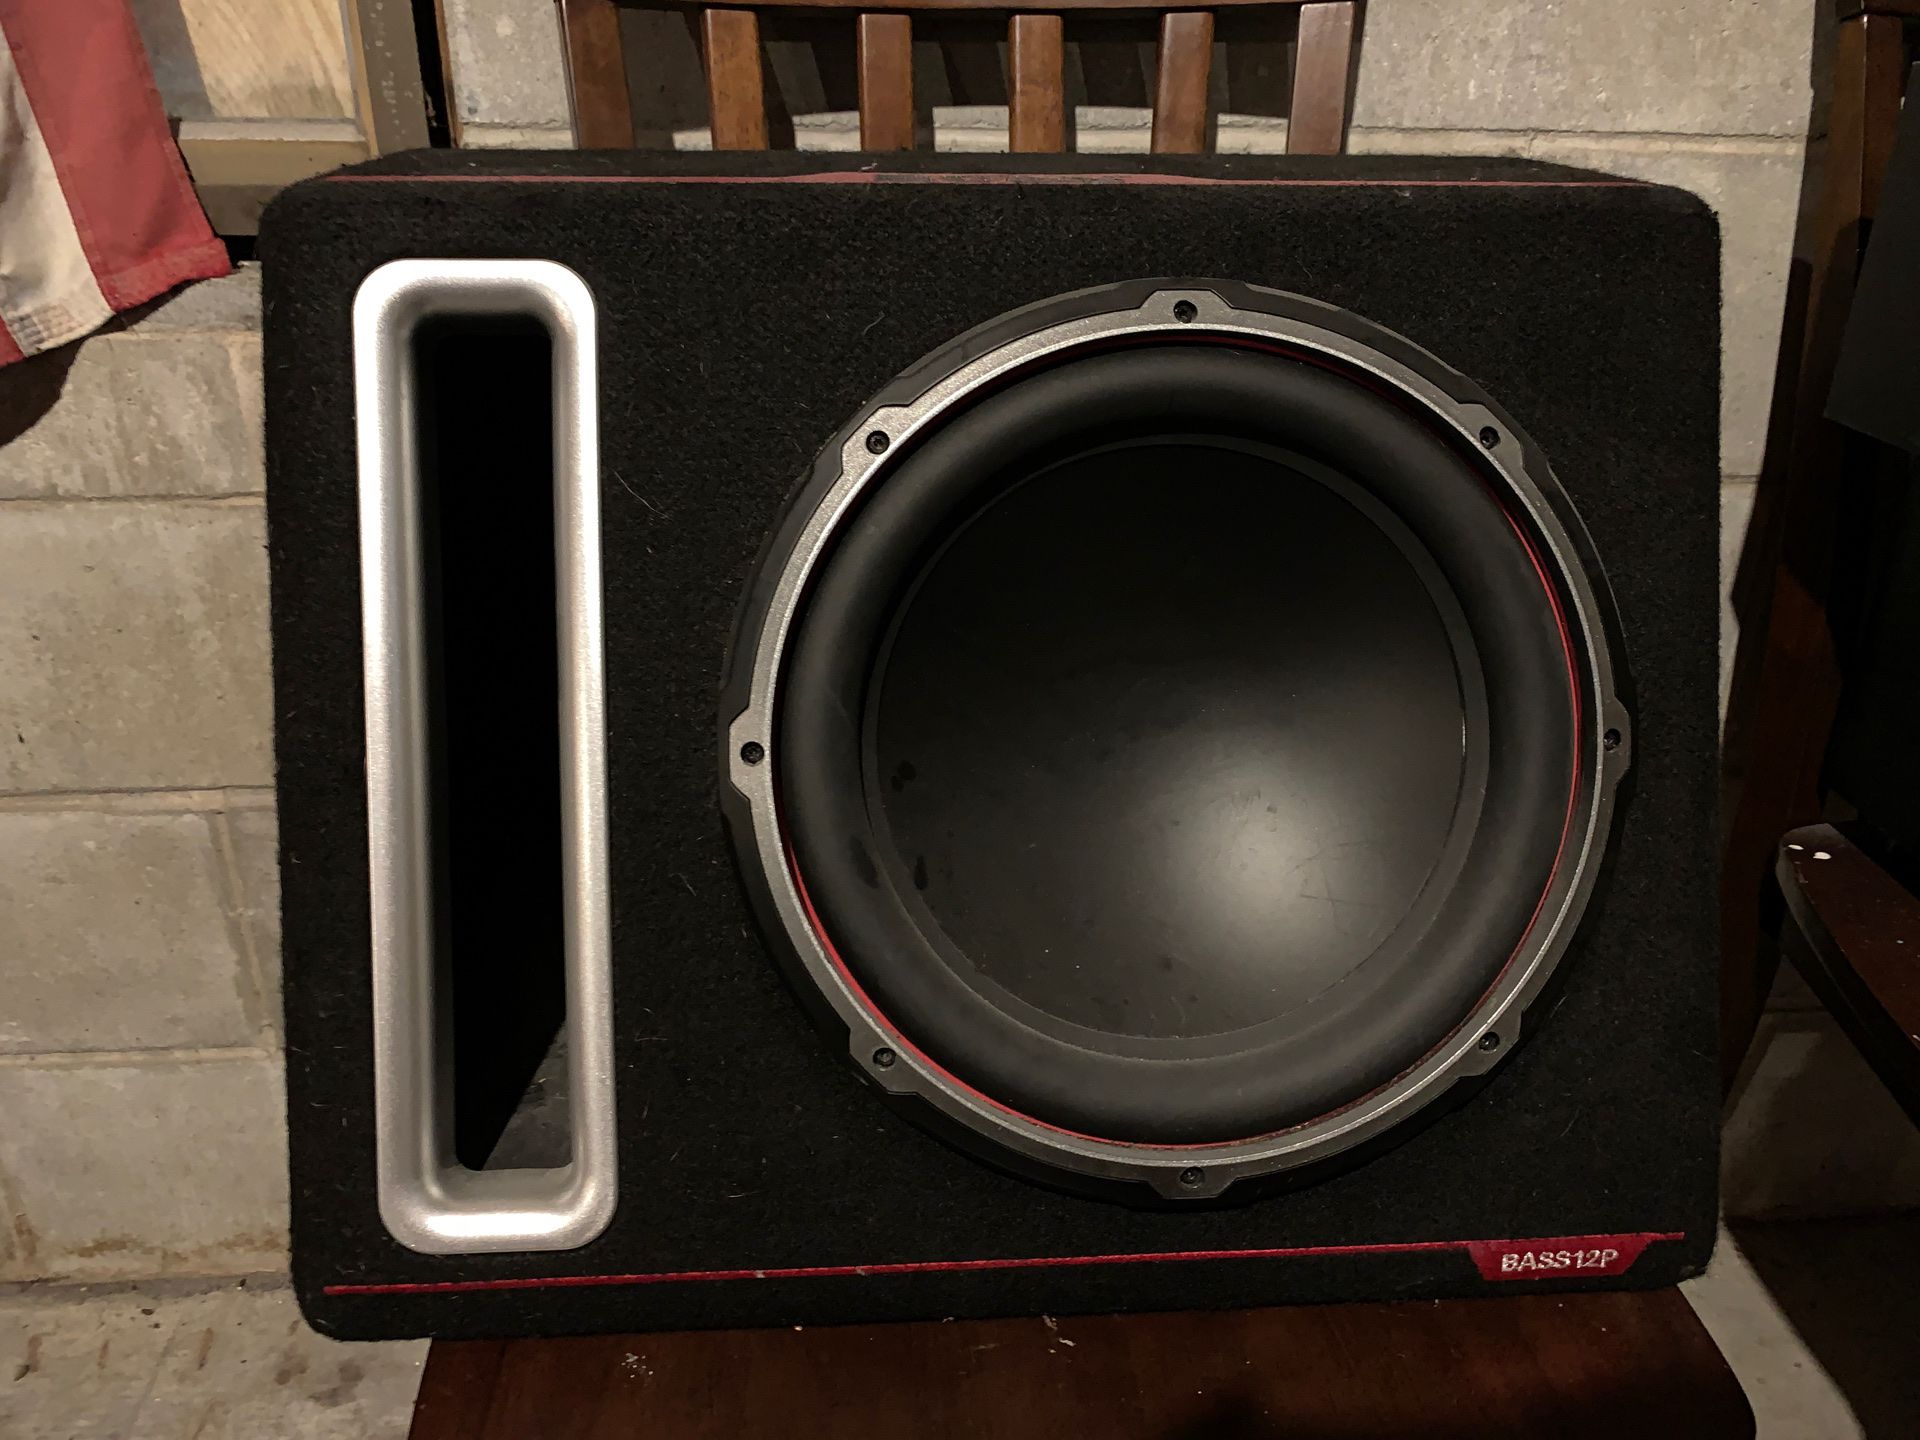 12 inch boss bass12p subwoofer works great like new